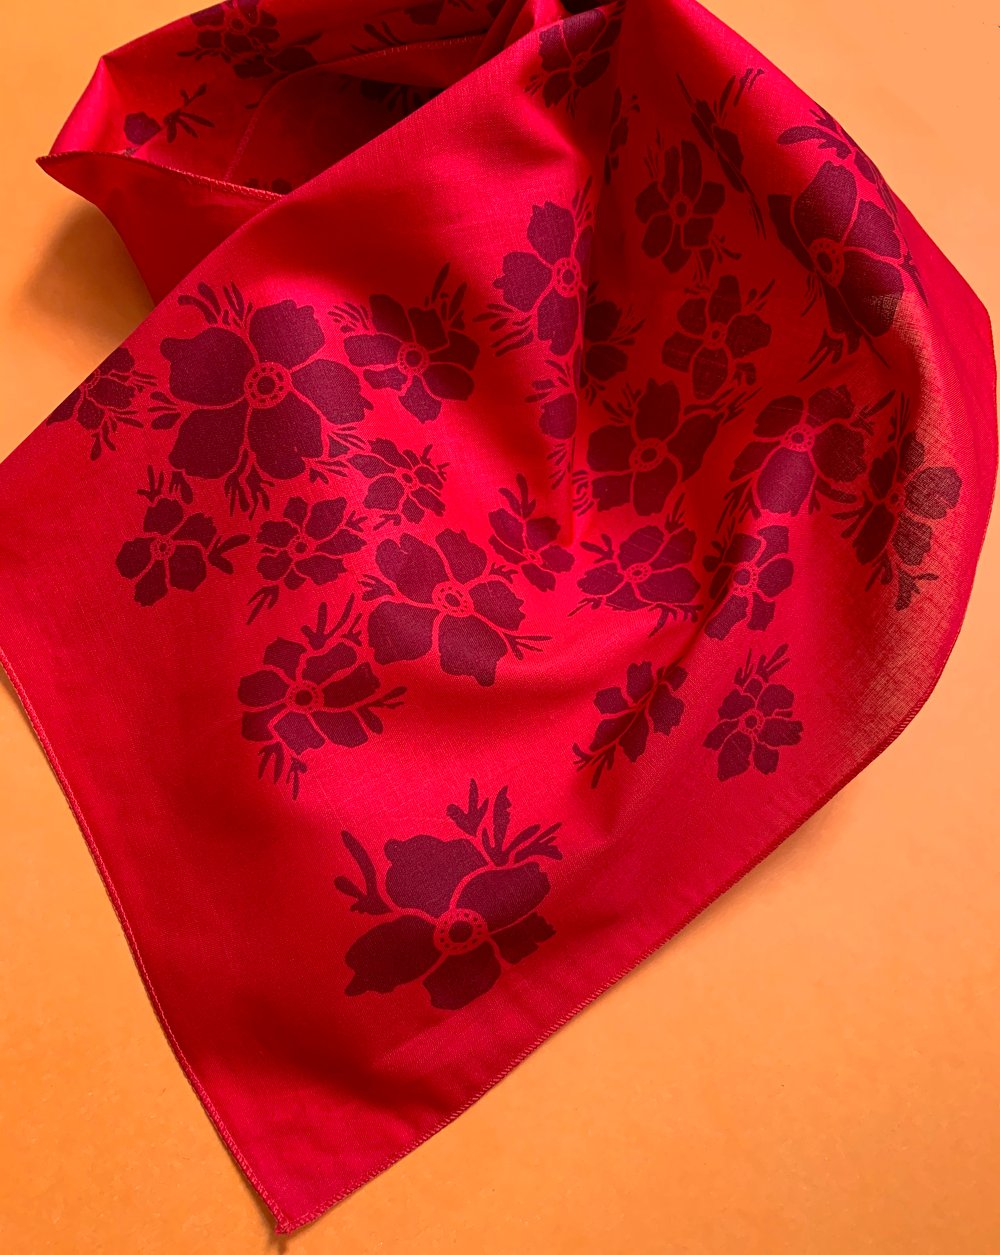 Anemone Floral Print Bandana in Red and Burgundy